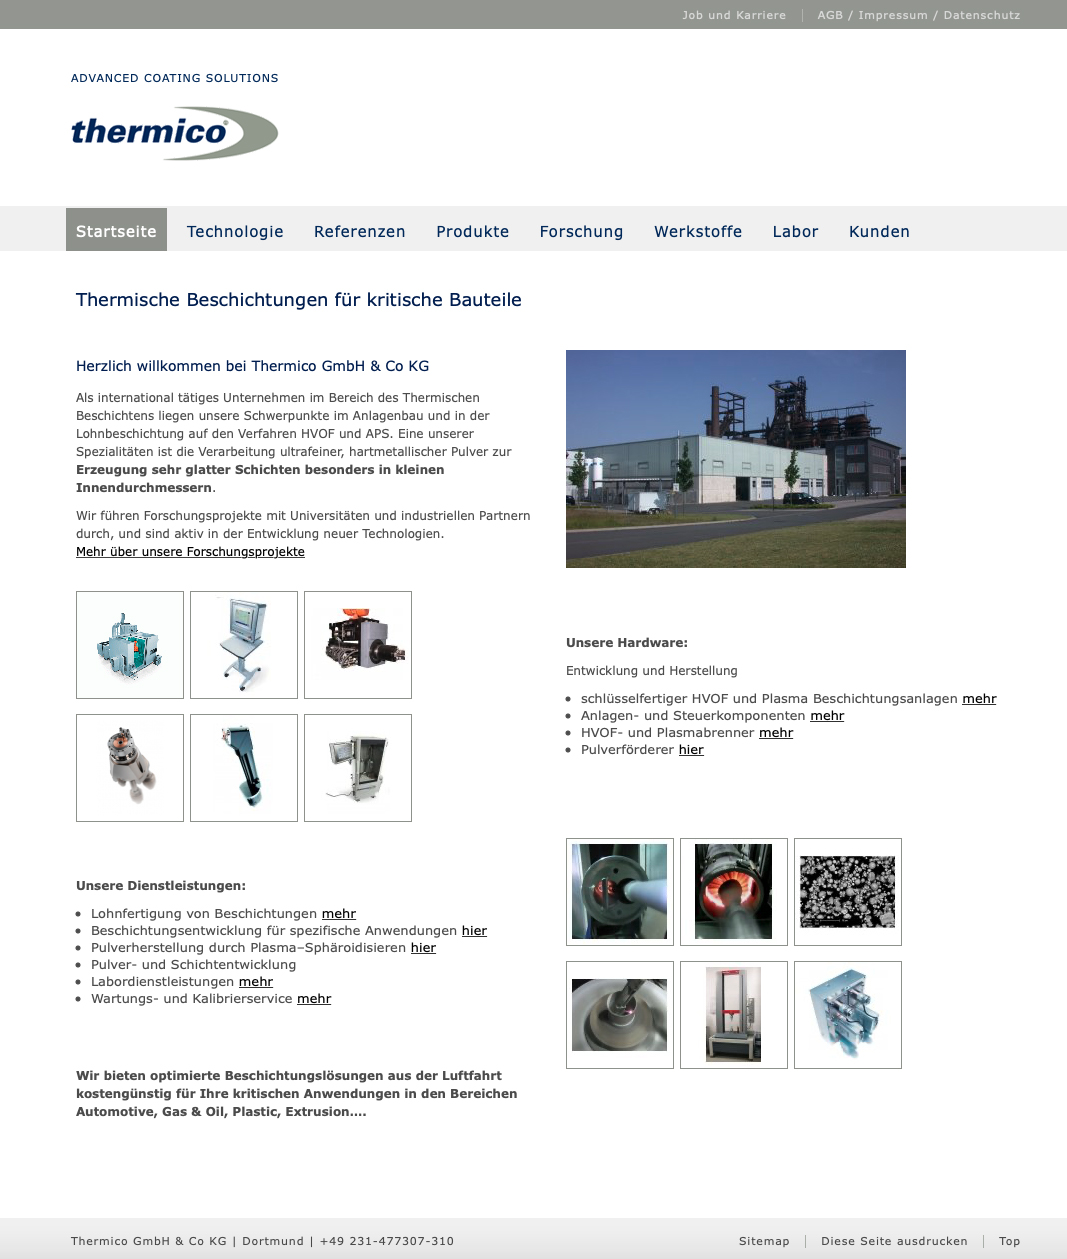 Thermico GmbH & Co. KG